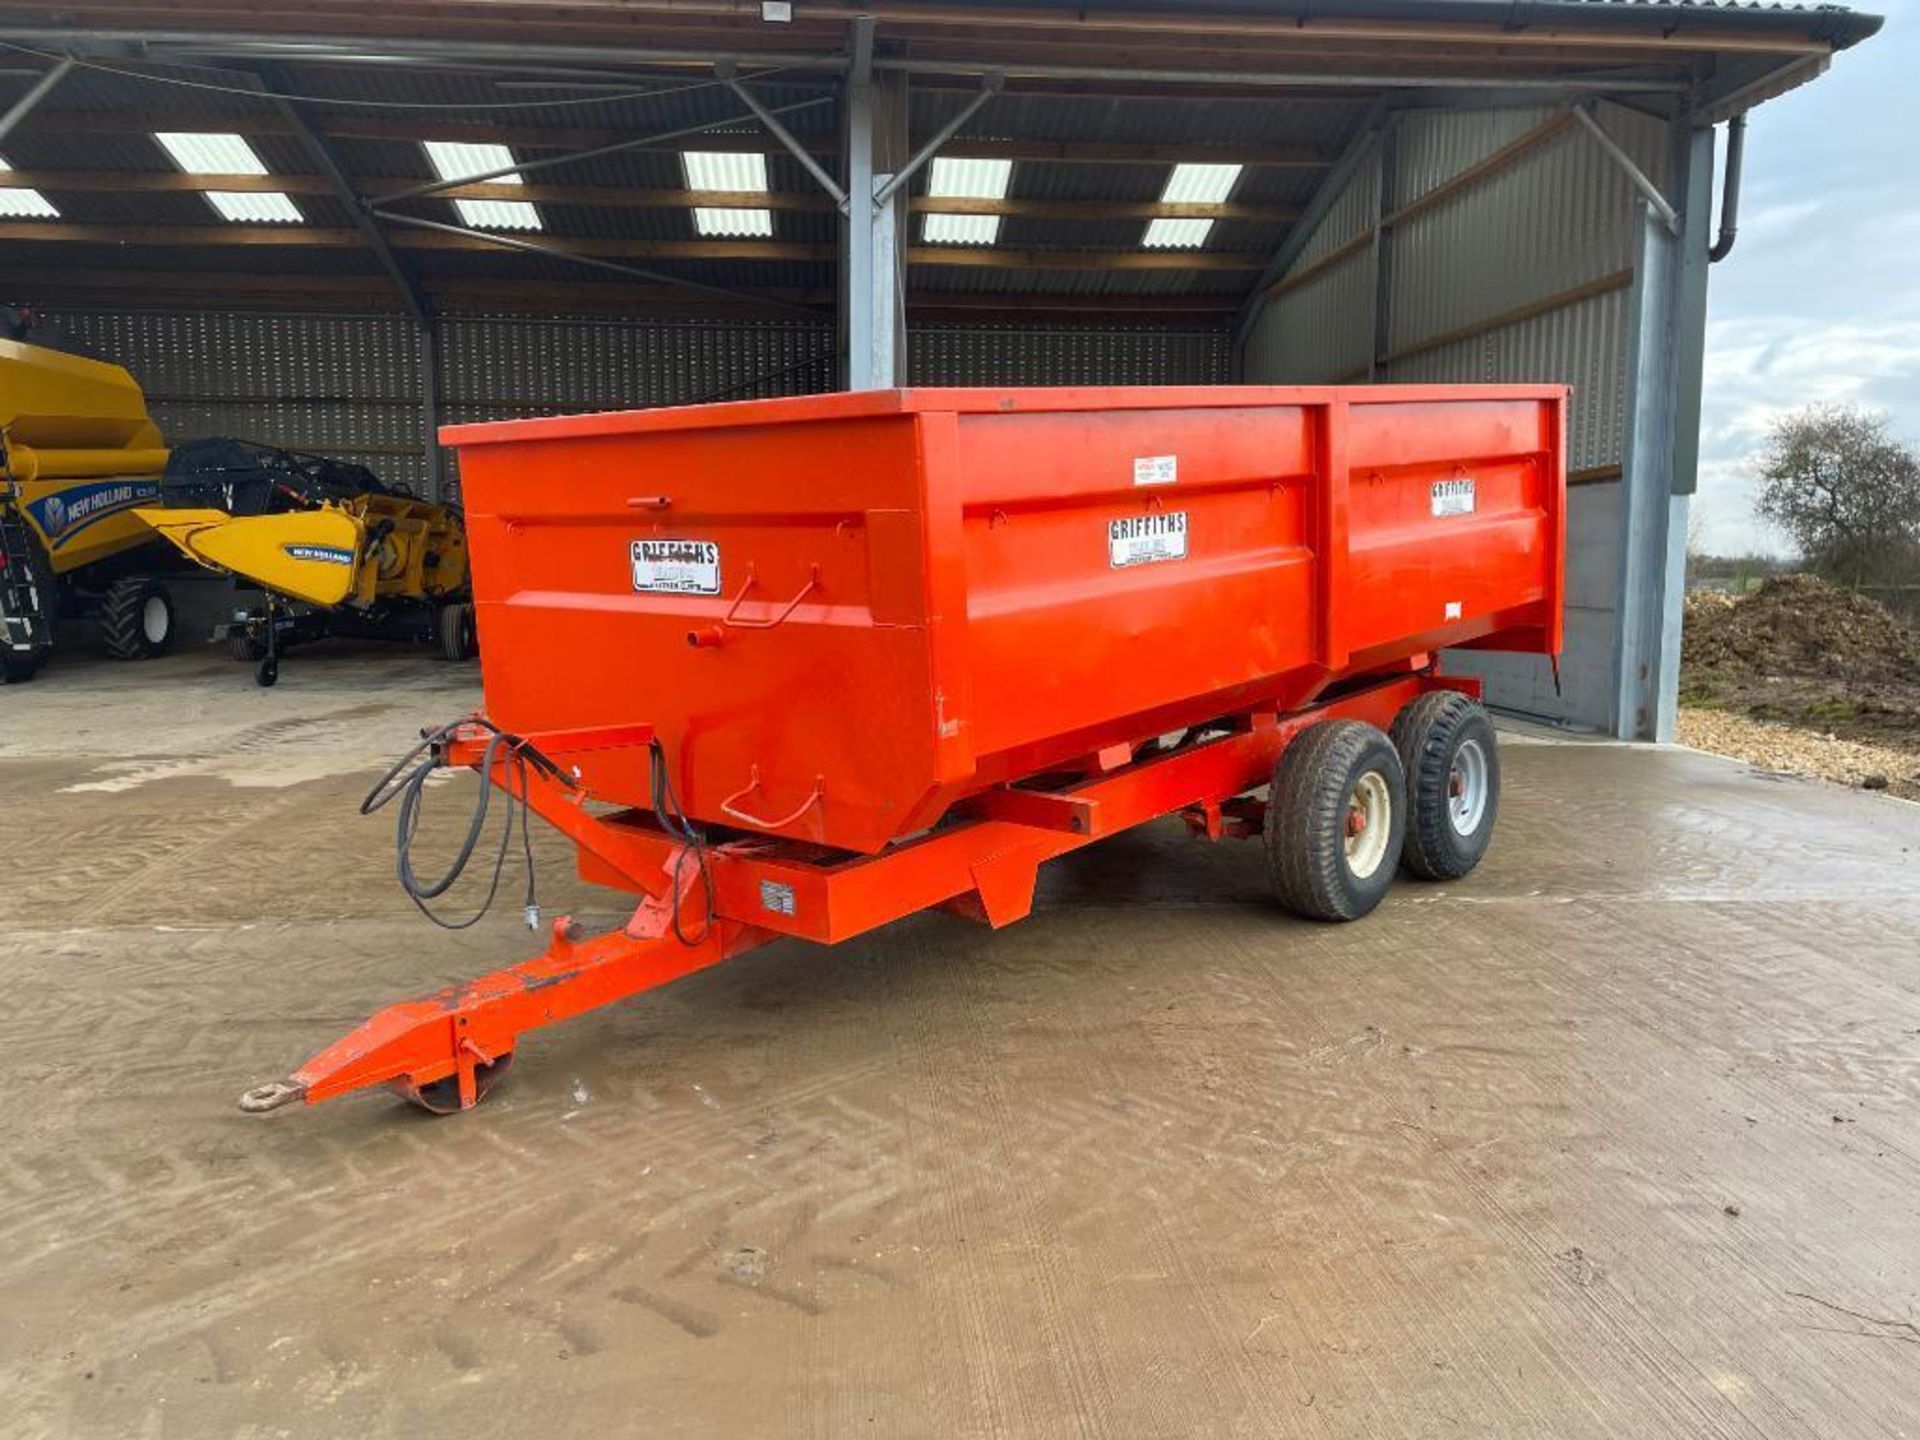 1984 Griffiths GT80 10t twin axle hydraulic tipping grain trailer with manual tailgate and grain chu - Image 2 of 15